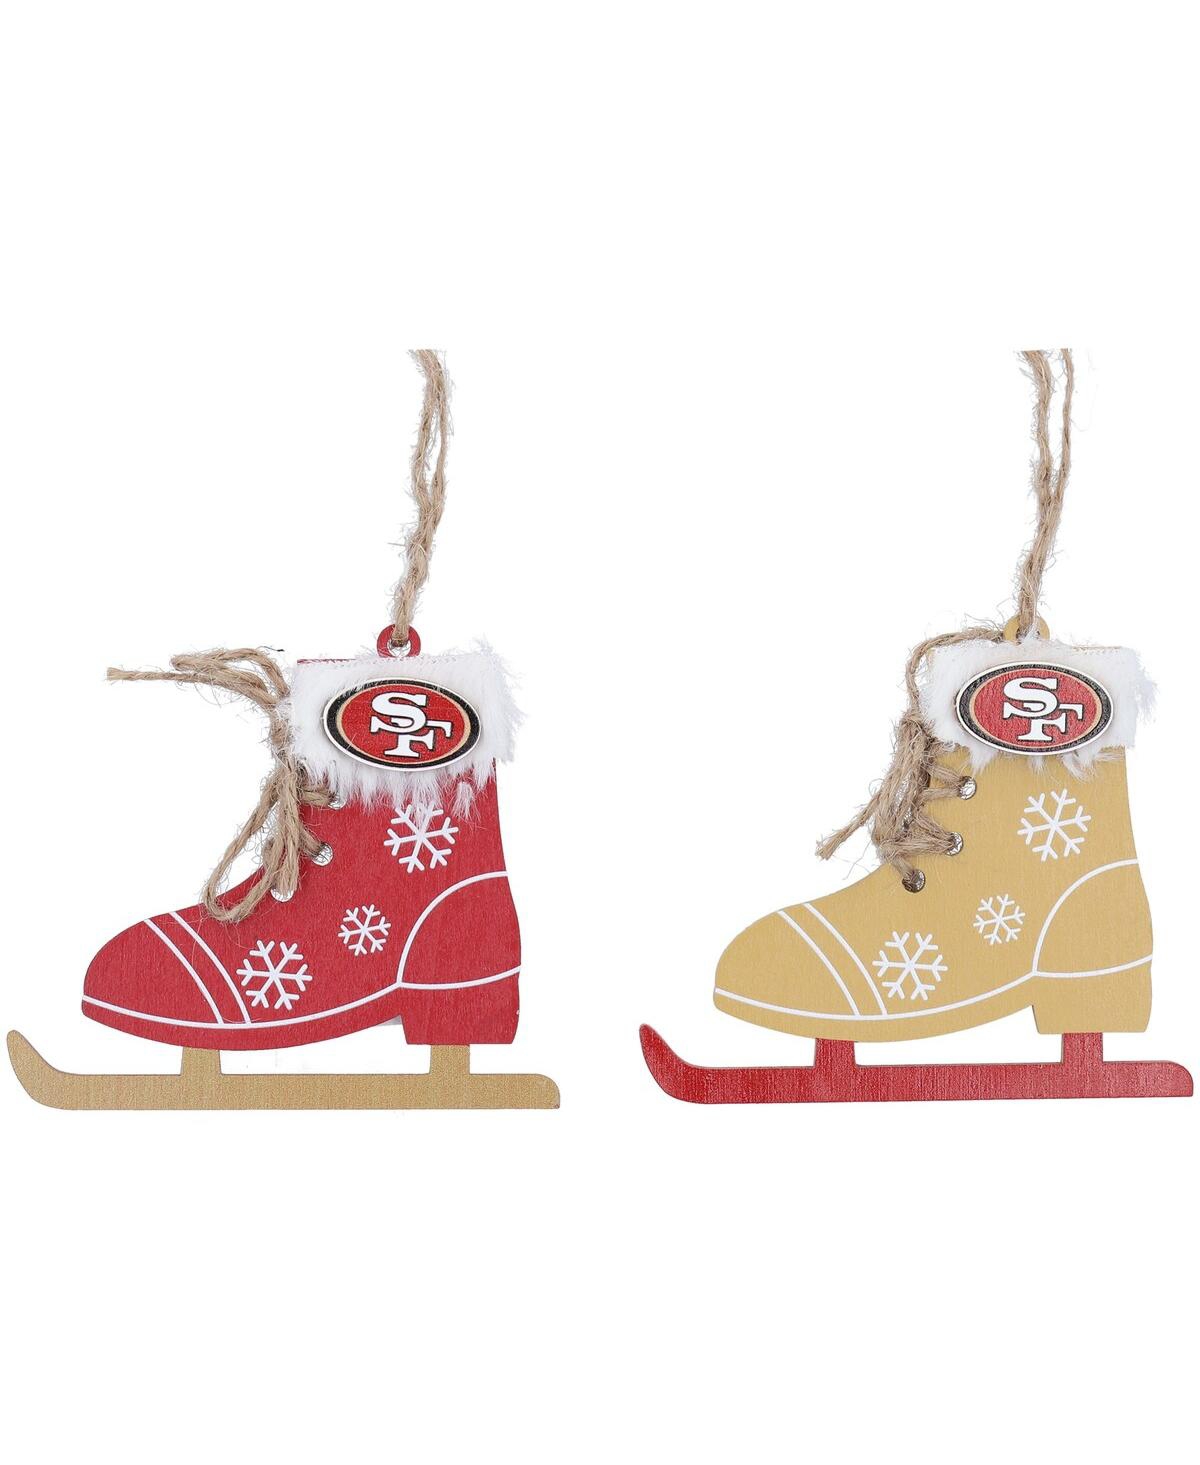 The Memory Company San Francisco 49ers Two-Pack Ice Skate Ornament Set - Cream, Red